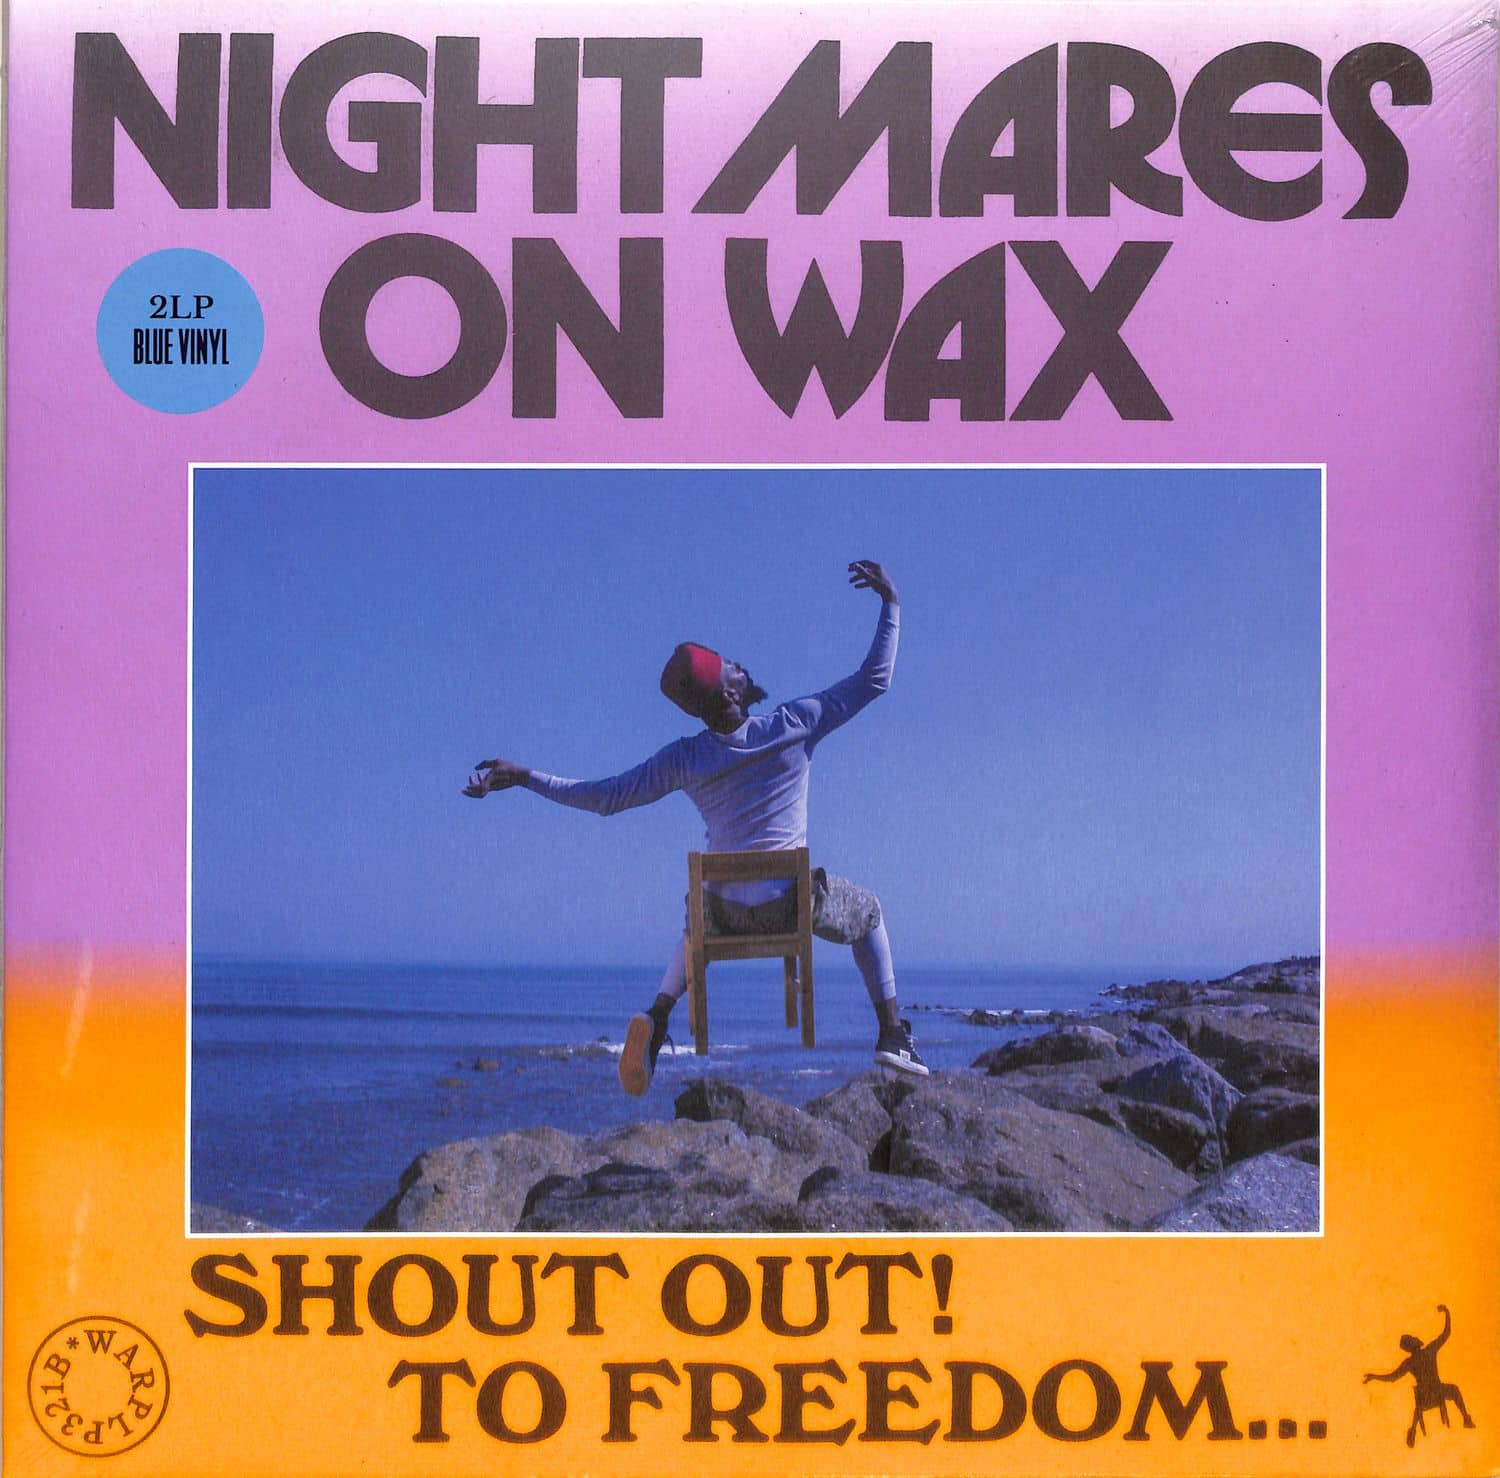 Nightmares On Wax - SHOUT OUT! TO FREEDOM 